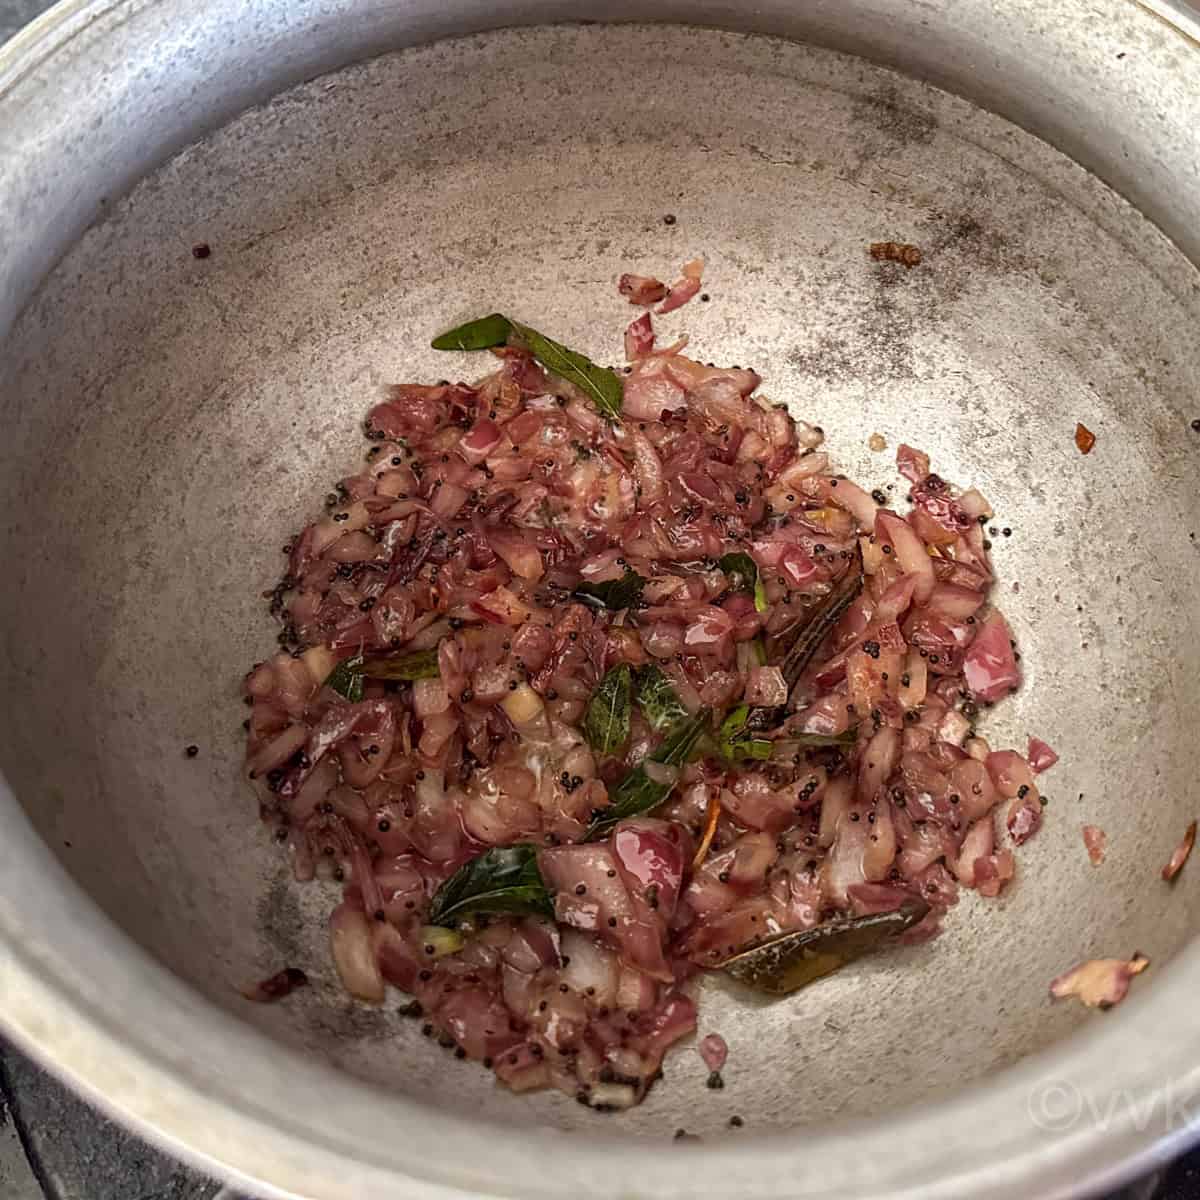 cooked onions